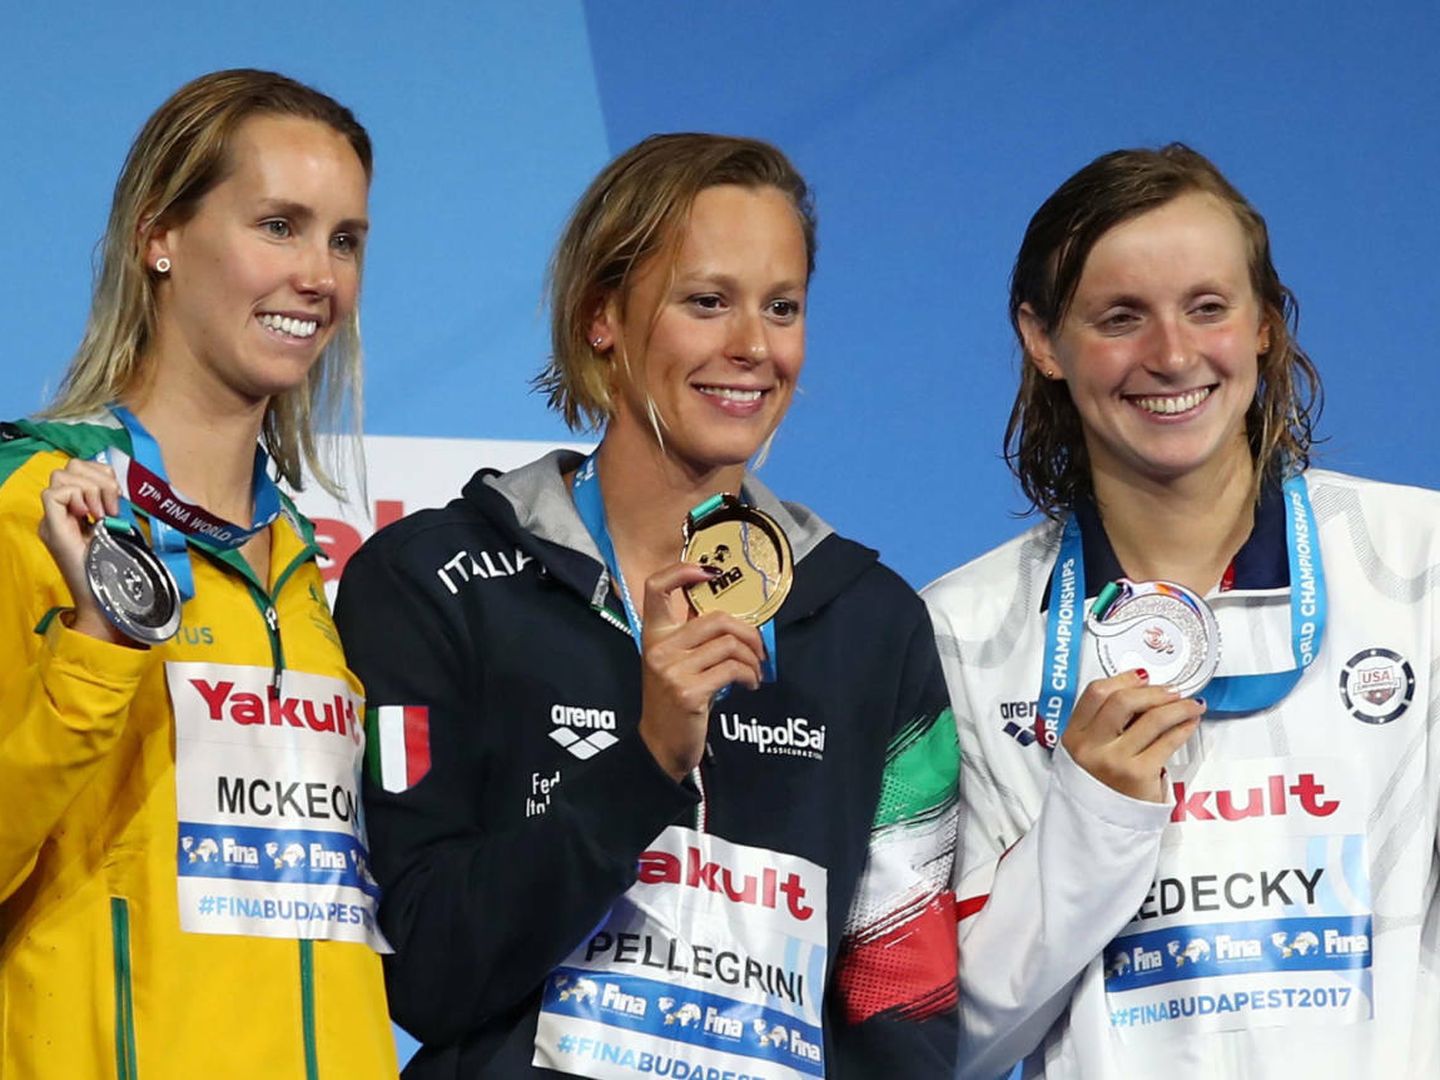 Swimming – 17th FINA World Aquatics Championships – Women's 200m Freestyle awarding ceremony – Budapest, Hungary – July 26, 2017 – (L-R) Emma McKeon (silver) of Australia, Federica Pellegrini (gold) of Italy and Katie Ledecky (silver) of the U.S. pose with the medals. REUTERS Michael Dalder